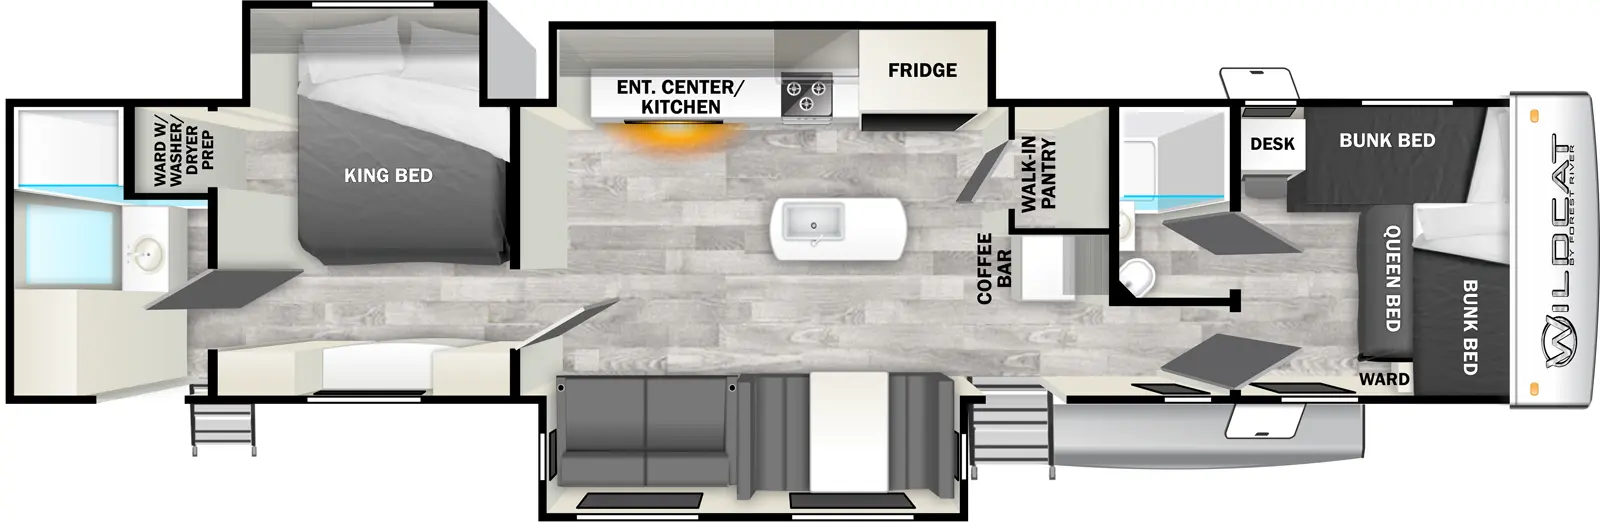 The 35FUN has three slideouts and two entries. Interior layout front to back: queen bed with bunk beds above on front and off-door side, wardrobe, desk, and full bathroom; coffee bar and walk-in pantry along inner wall; door side entry and slideout with dinette and sofa; off-door side slideout with refrigerator, kitchen counter with cooktop, and entertainment center; kitchen island with sink; mid bedroom with off-door side king bed slideout and loft above, and off-door side wardrobe with washer/dryer prep; rear full bathroom with second entry.